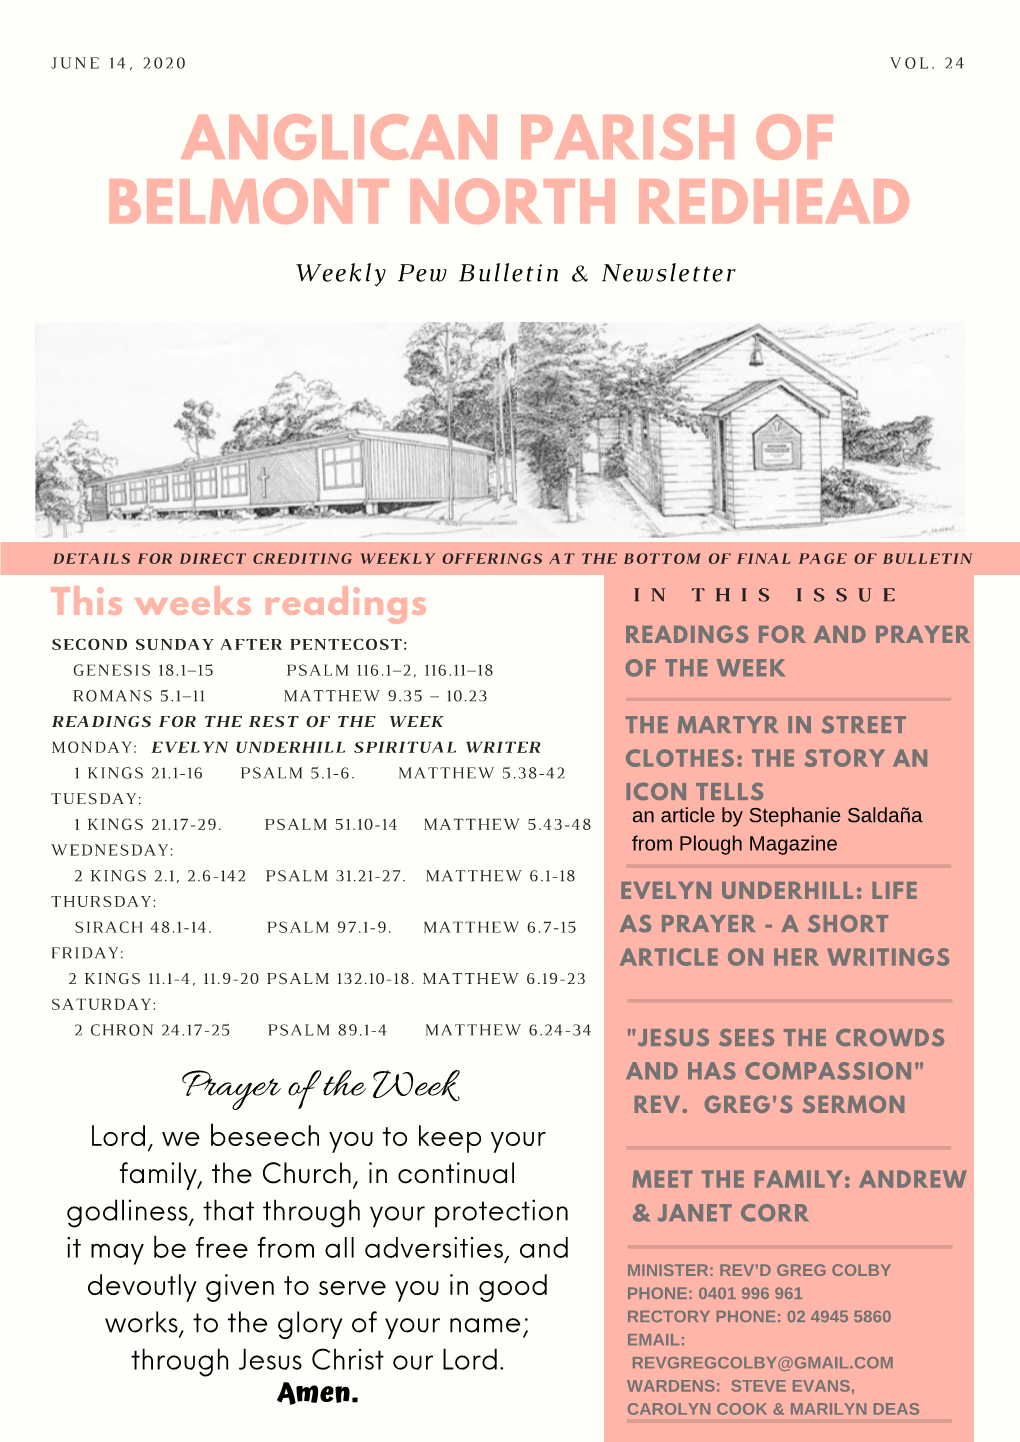 ANGLICAN PARISH of BELMONT NORTH REDHEAD Weekly Pew Bulletin & Newsletter